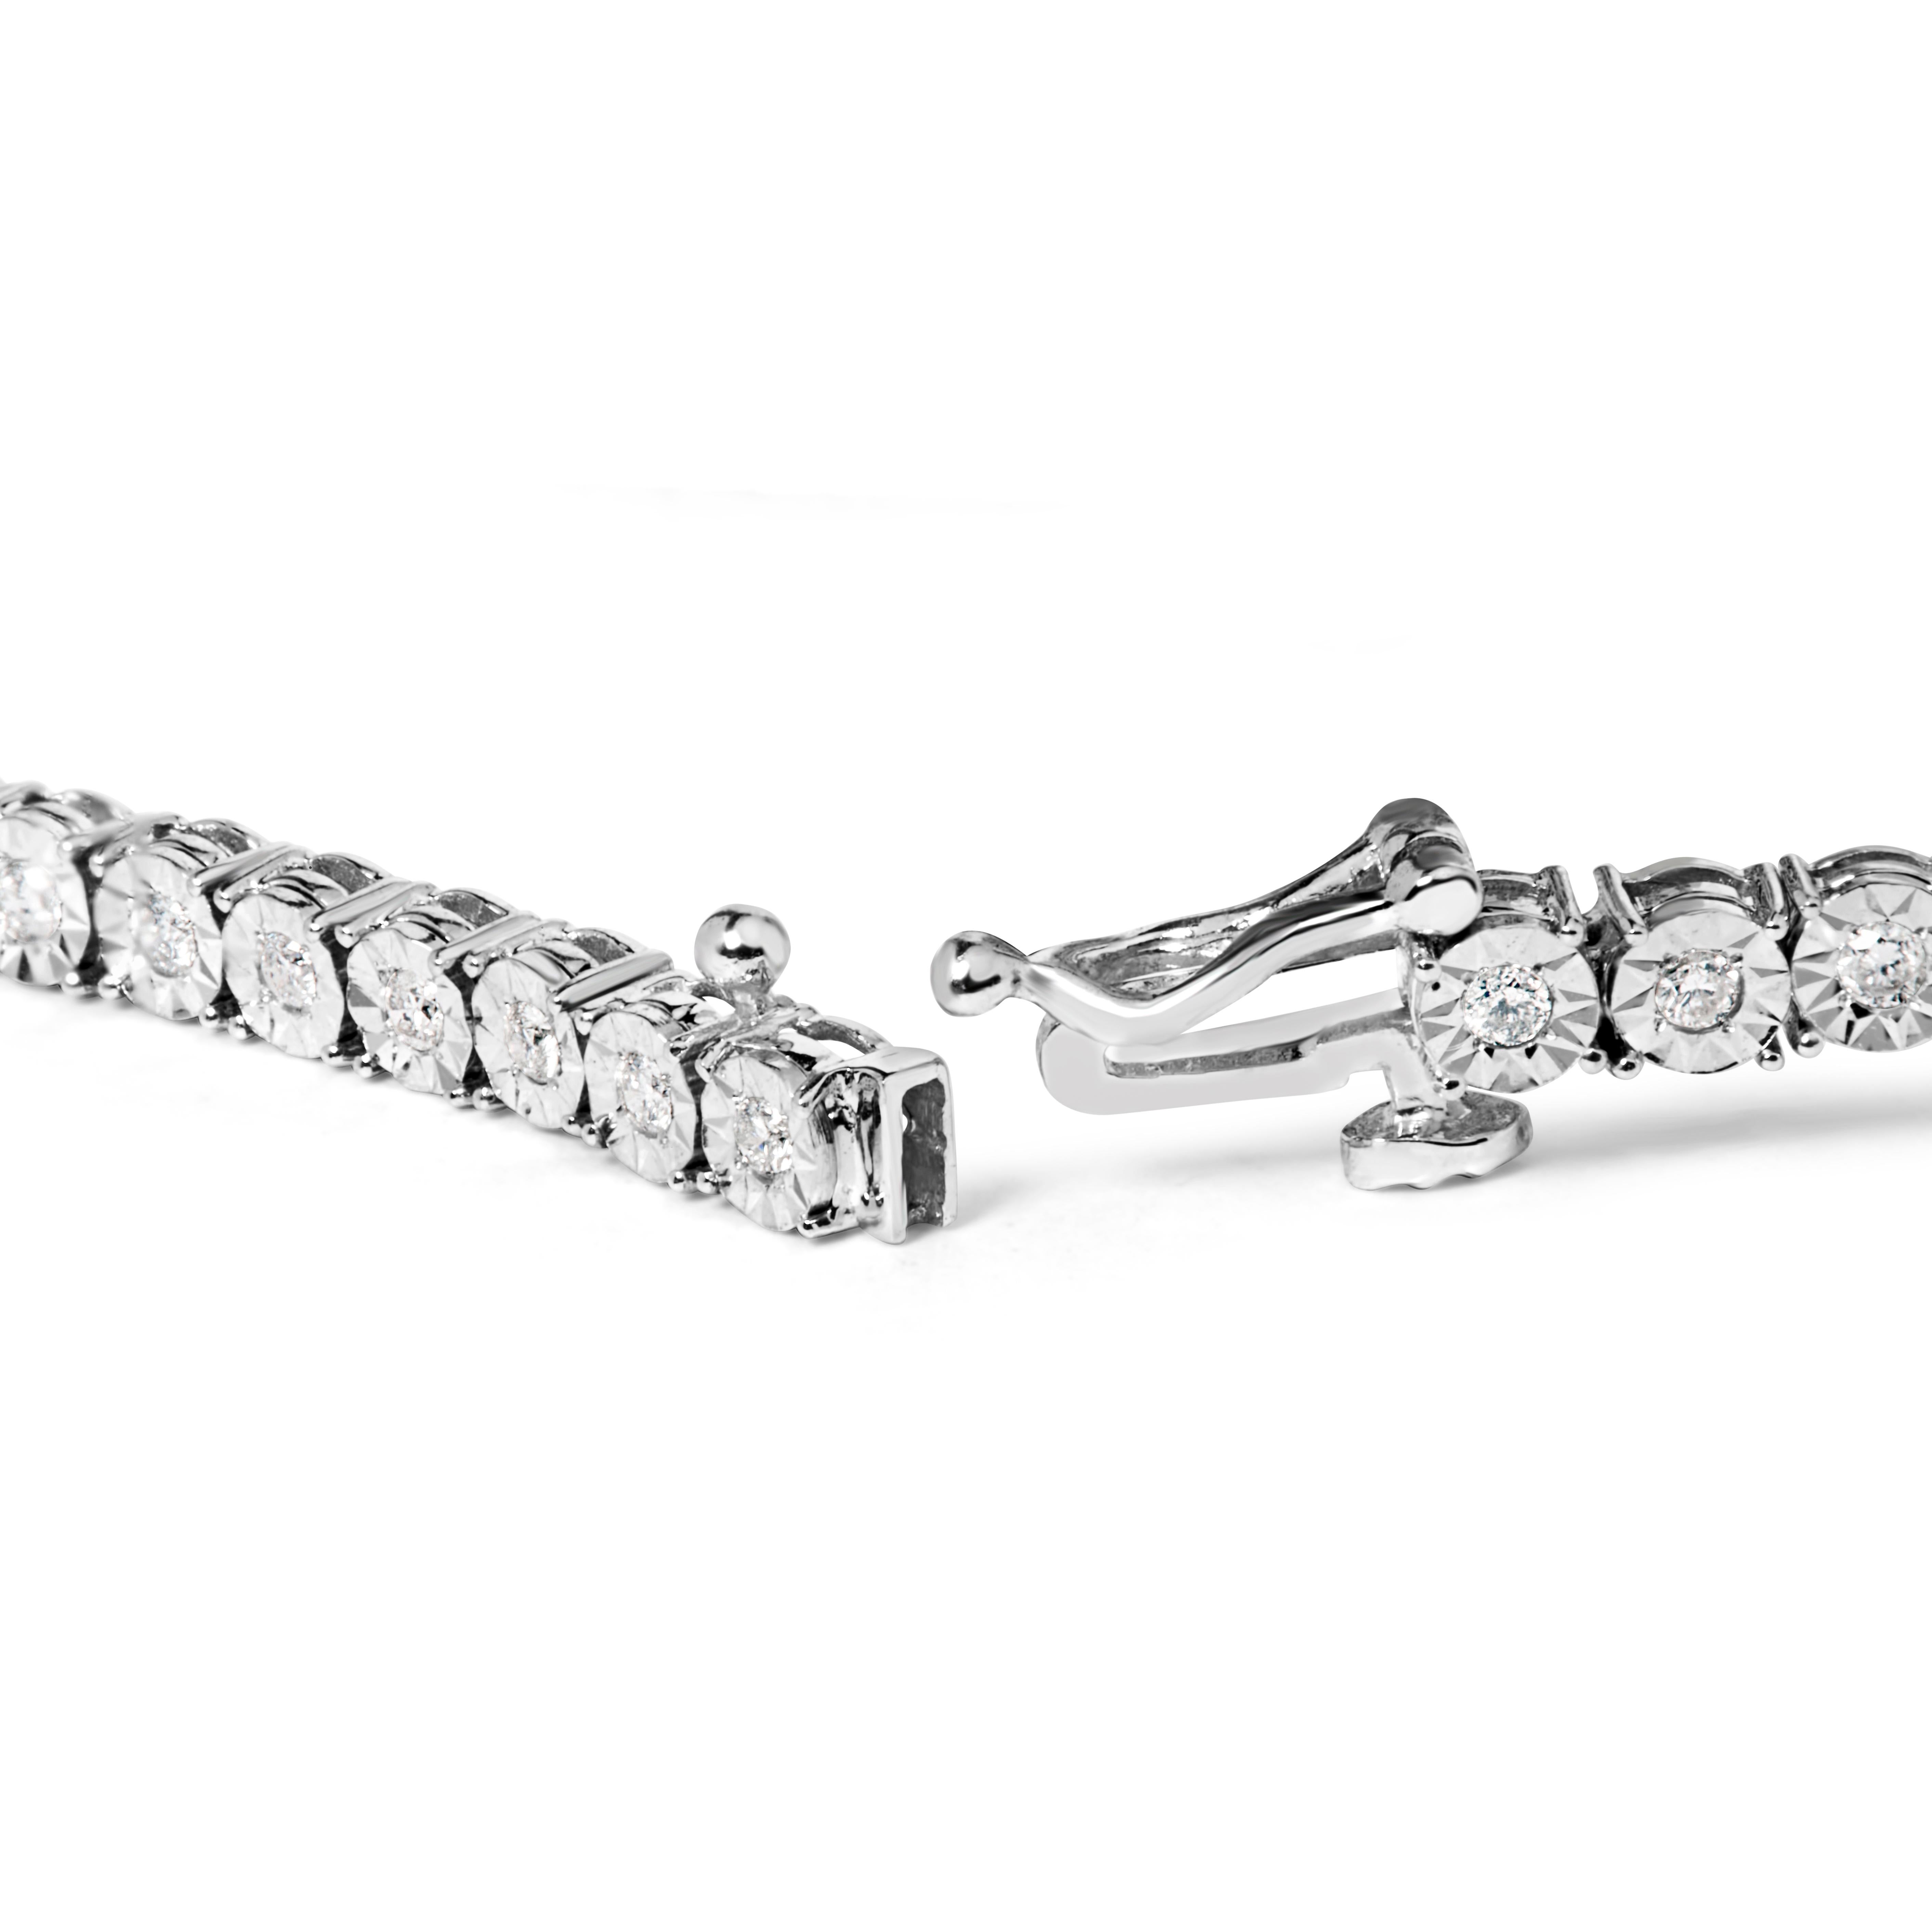 This feminine and luxe tennis bracelet is made up of the most lovely, multifaceted rose cut diamonds, reminiscent of vintage-era Art Deco jewelry style. Set in real, solid .925 sterling silver links for timeless style, in your choice of precious